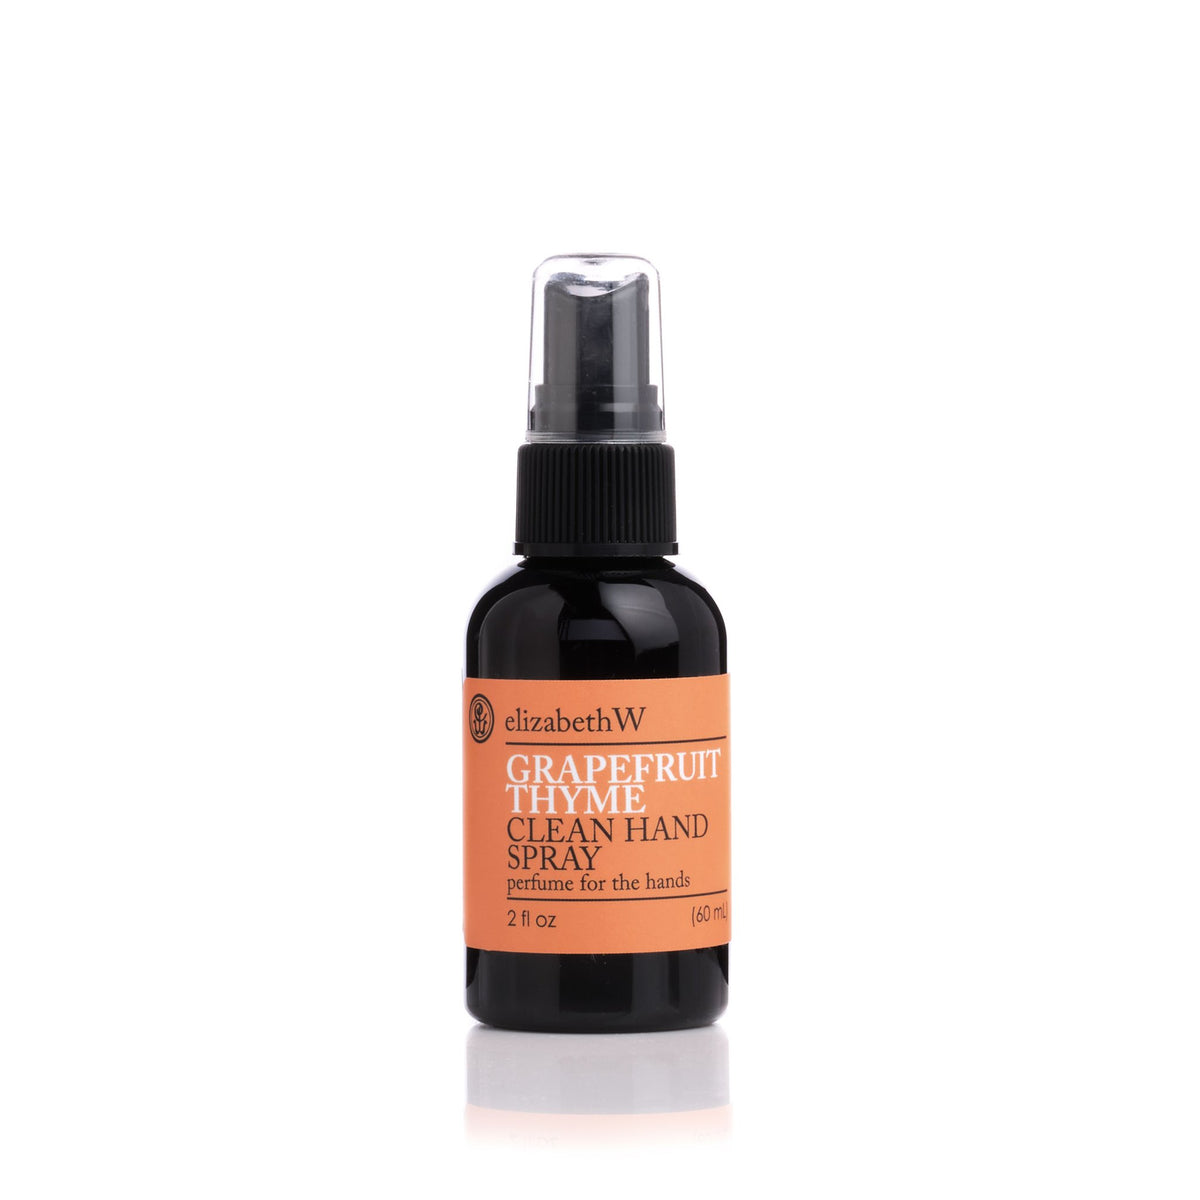 A bottle of elizabeth W Botanical Beauty Grapefruit Thyme Clean Hand Spray with essential oils, featuring a black spray nozzle and label, against a white background.